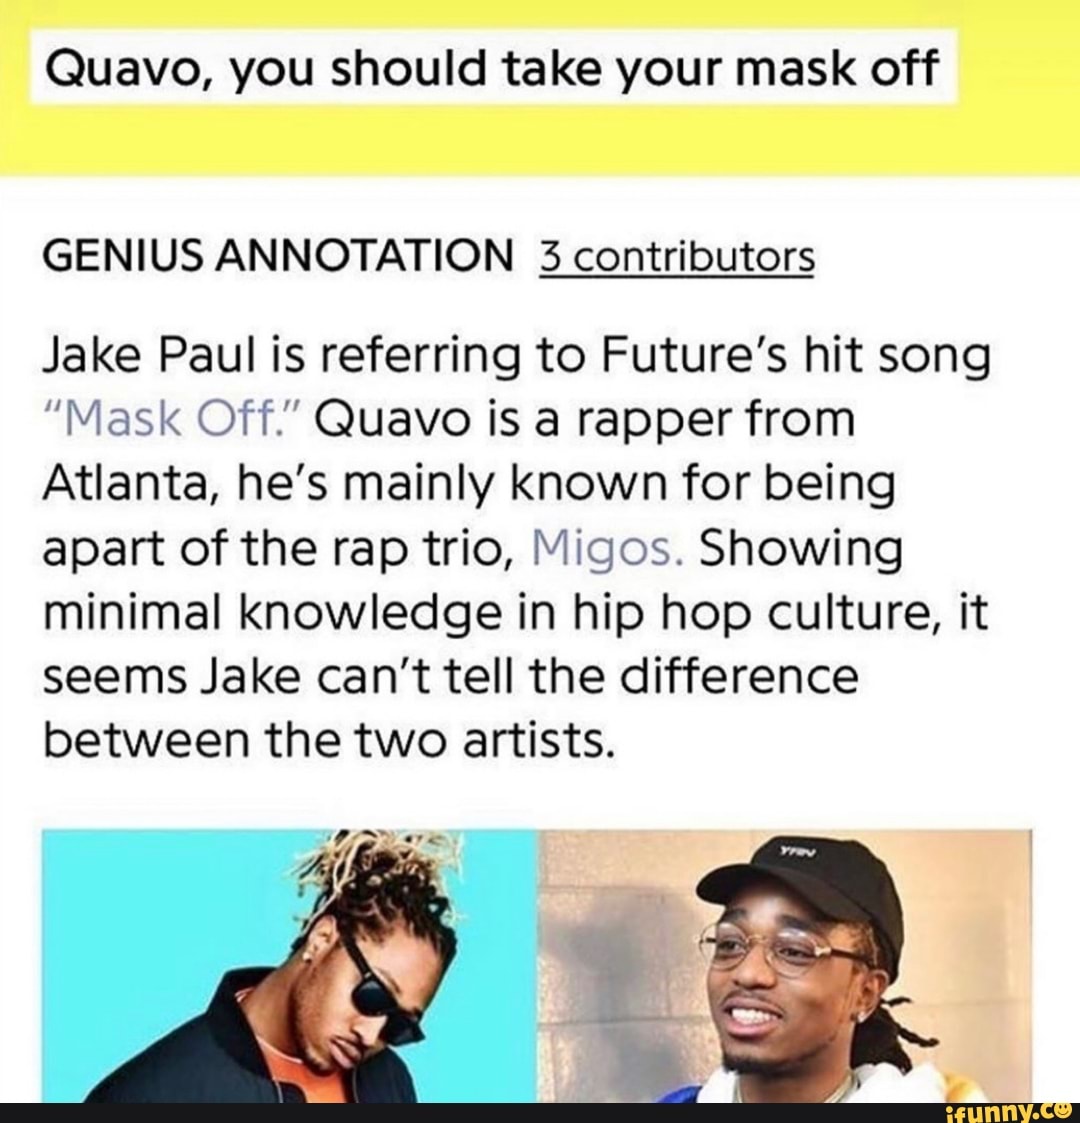 Quavo, should take your mask off GENIUS ANNOTATION contributors Jake is referring